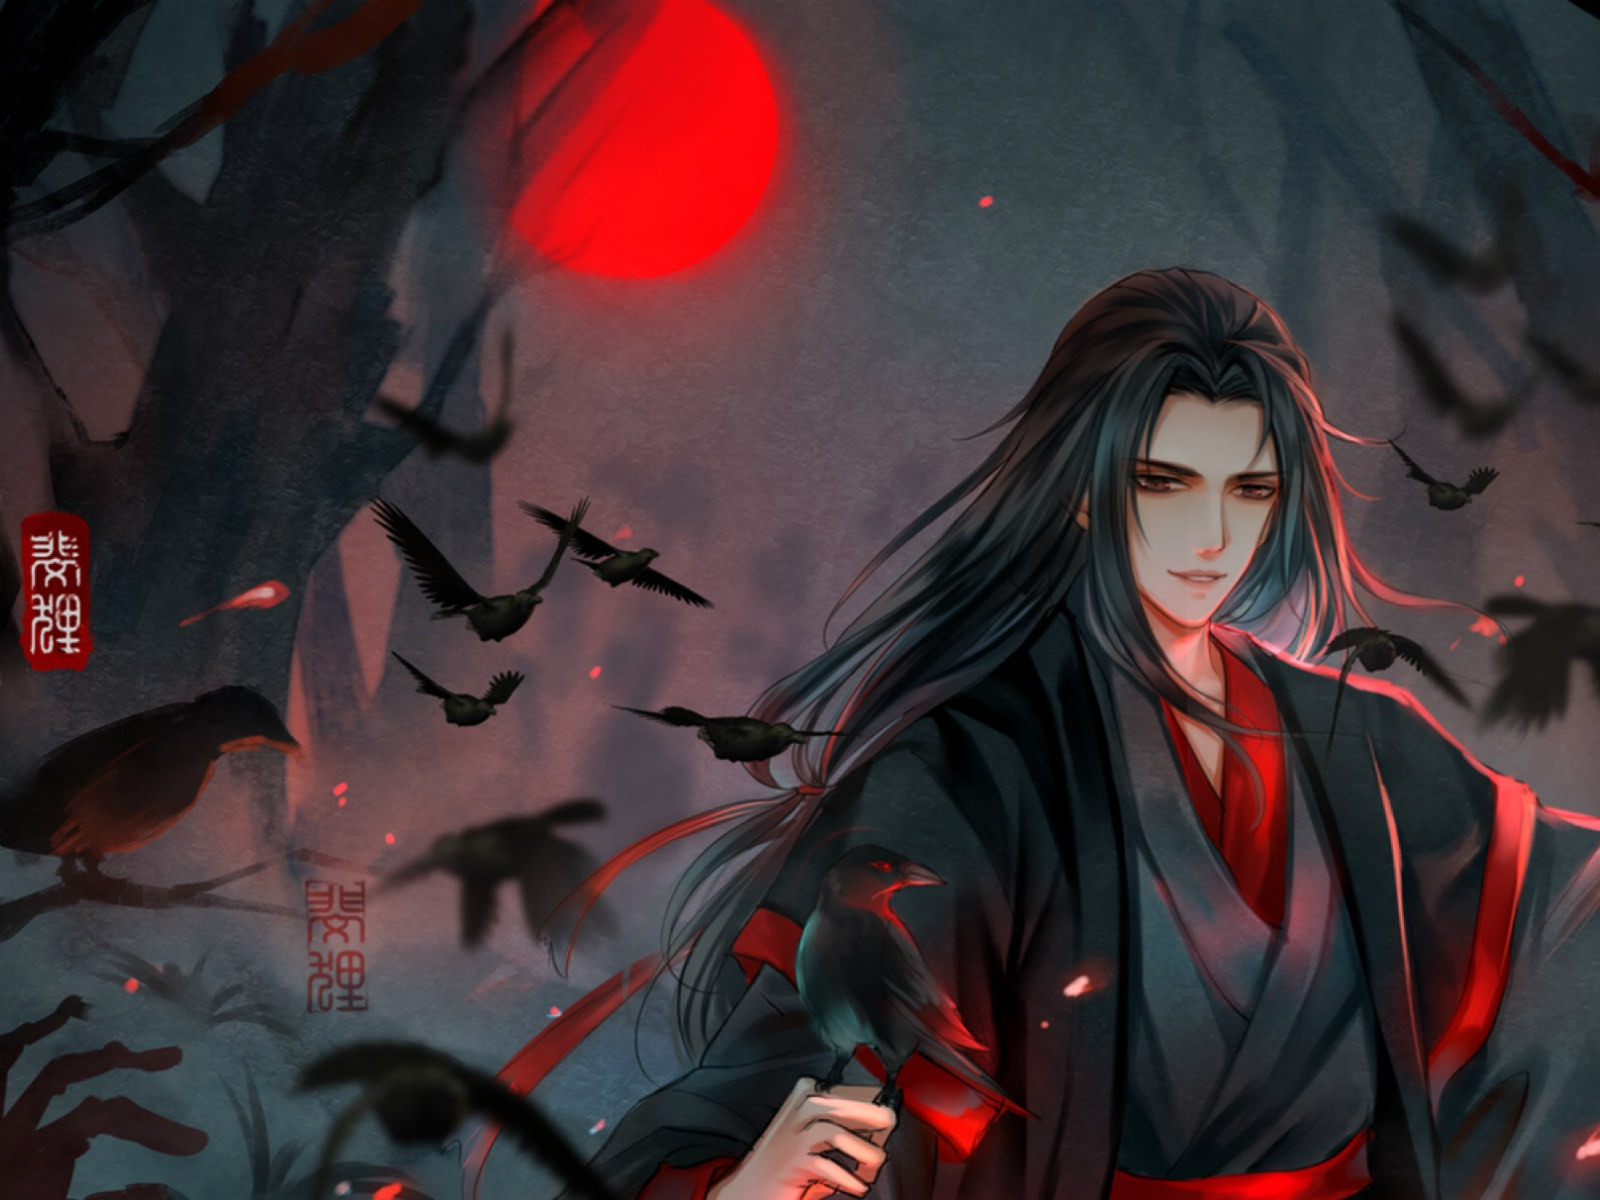 blood Moon, black crows, fog in the forest, Chinese clothing, Mo Dao Zu Shi...